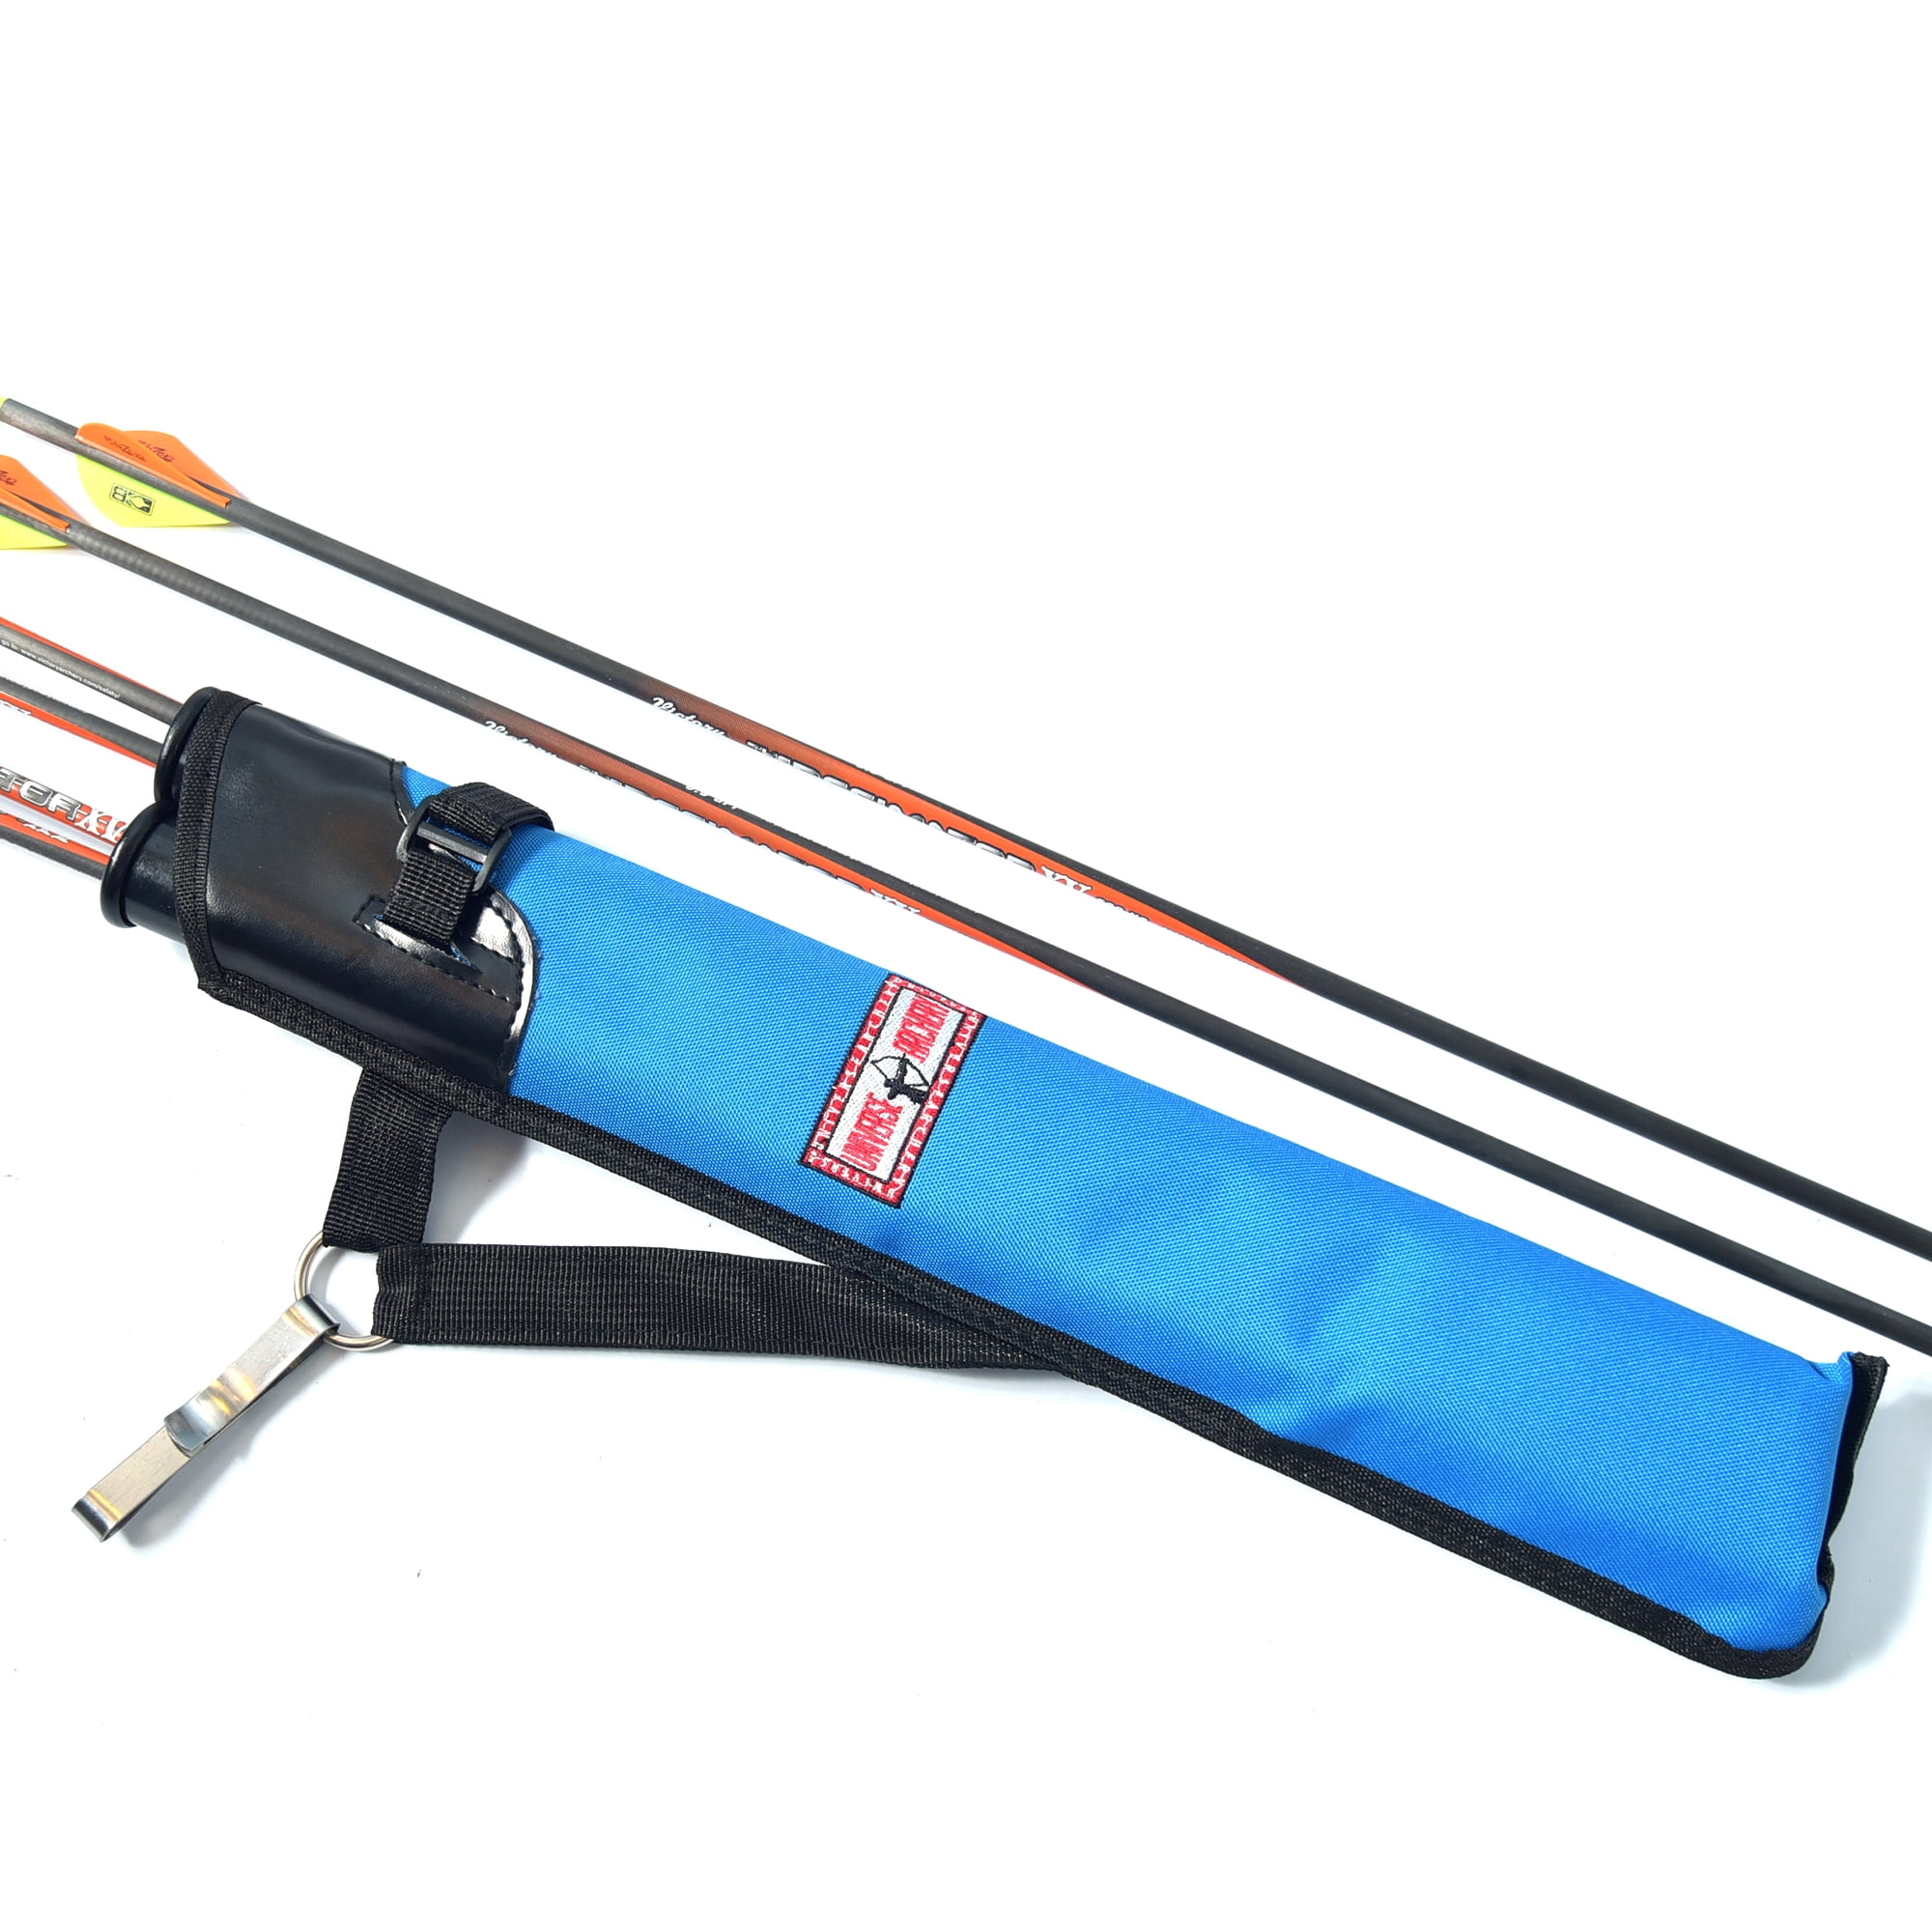 lightweight bow quiver